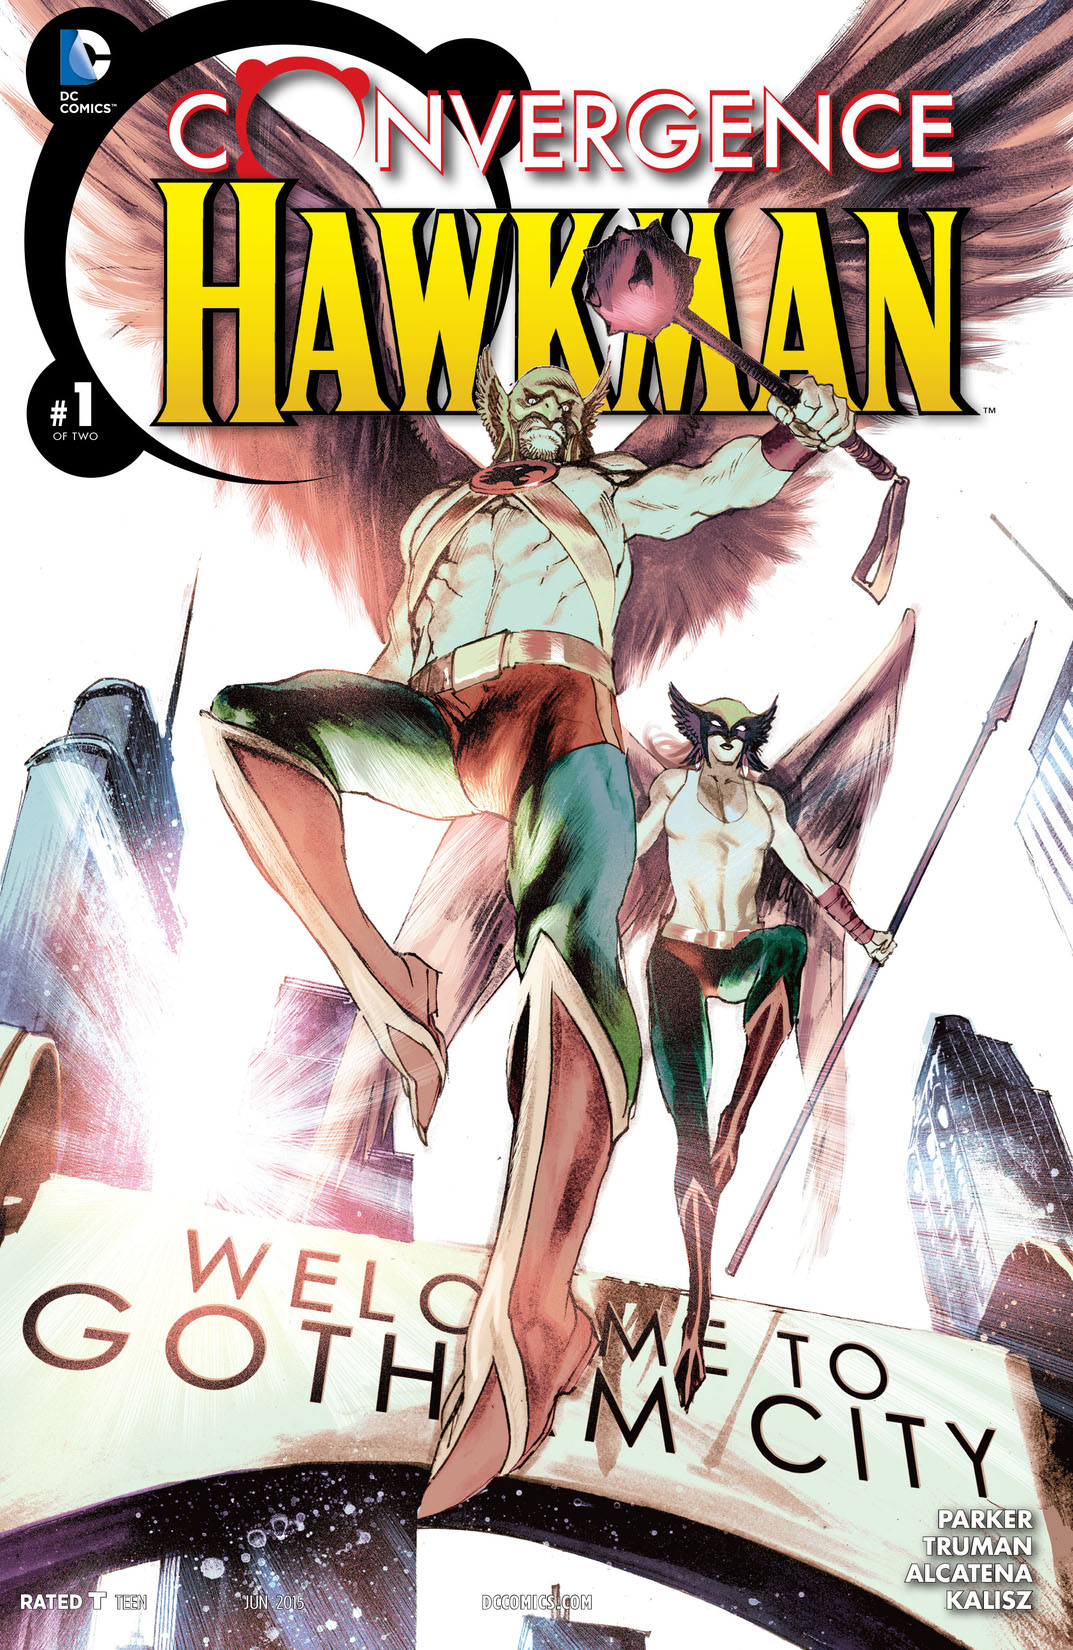 Convergence: Hawkman #1 preview images